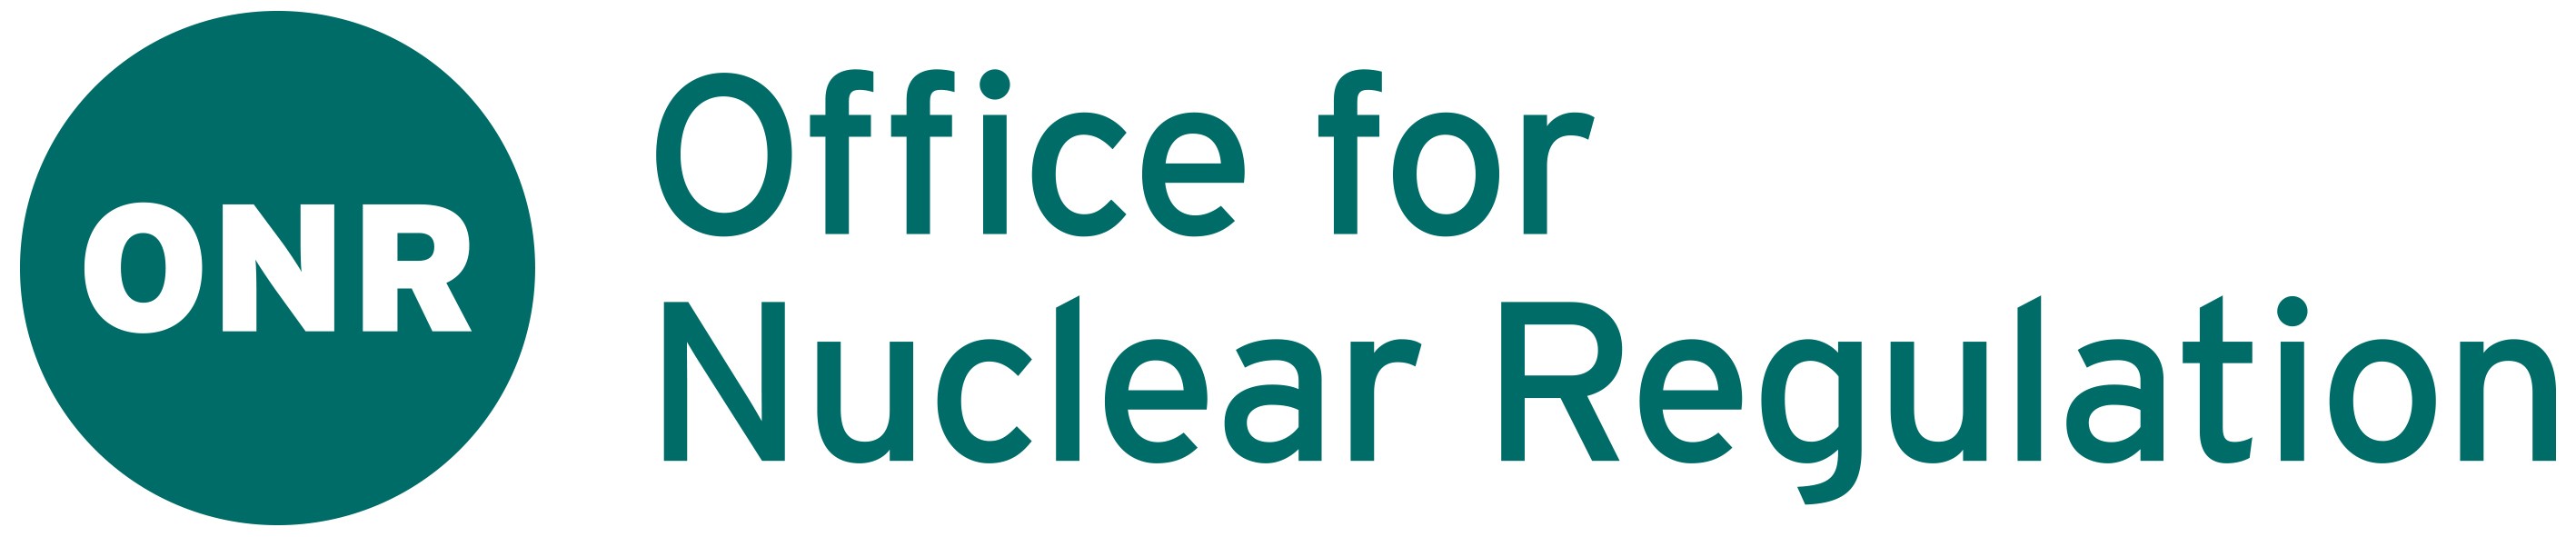 The Office for Nuclear Regulation